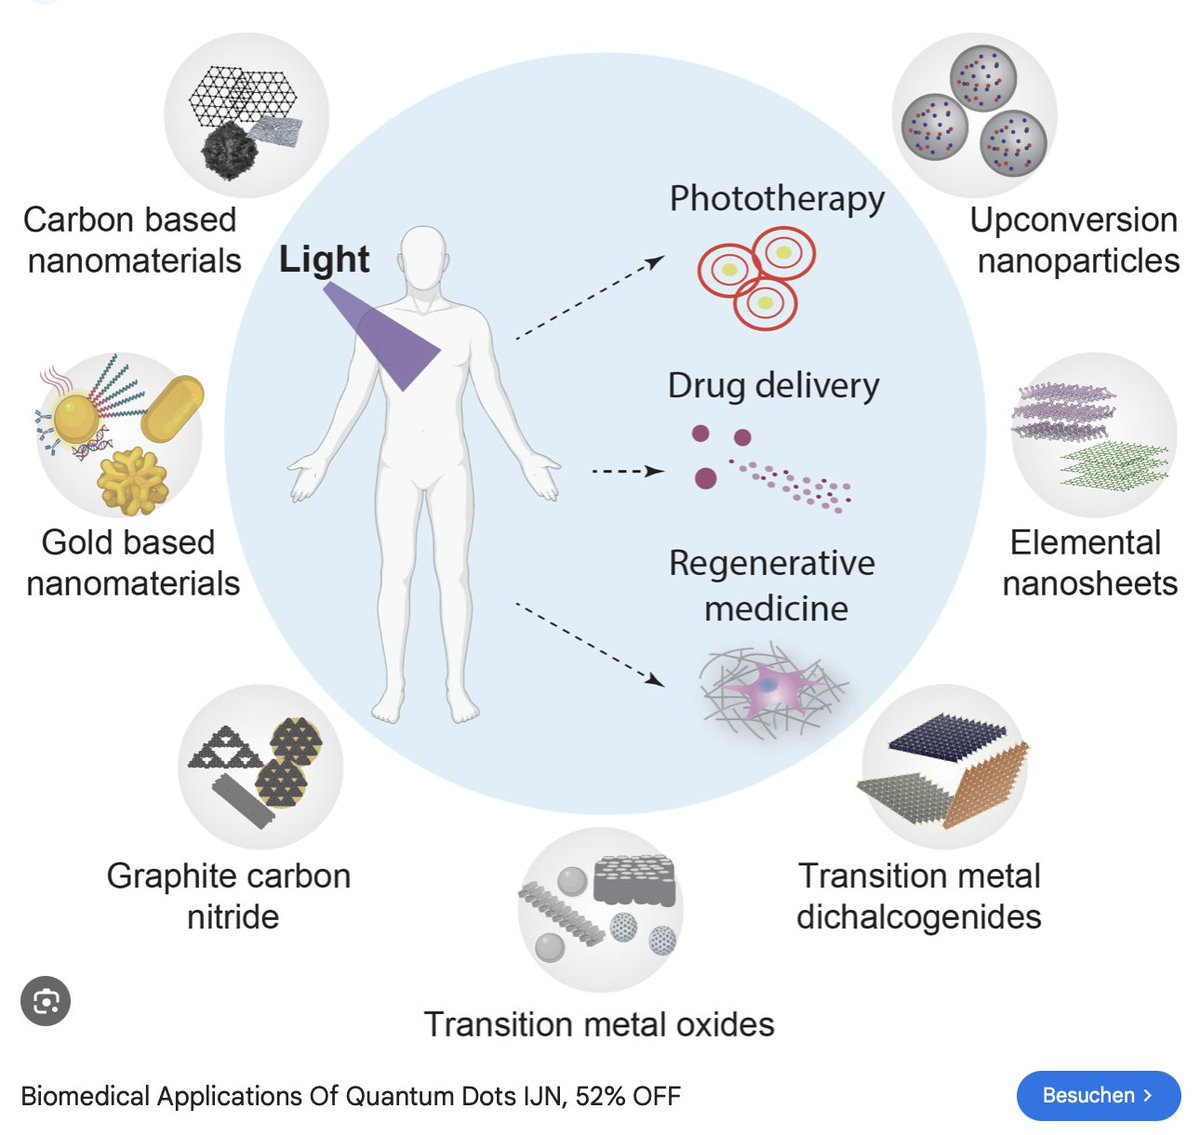 Shall we shed a bit of light on Quantum Dots and their Biomedical Applications?

#TargetedDrugDelivery

#TissueEngineering

#IntraBodyNanoNetworks

#NanoCyberInterfaces

#IntraBodyNanoRouting

Who uses the Networks remotely?

#MedicalBodyAreaNetwork